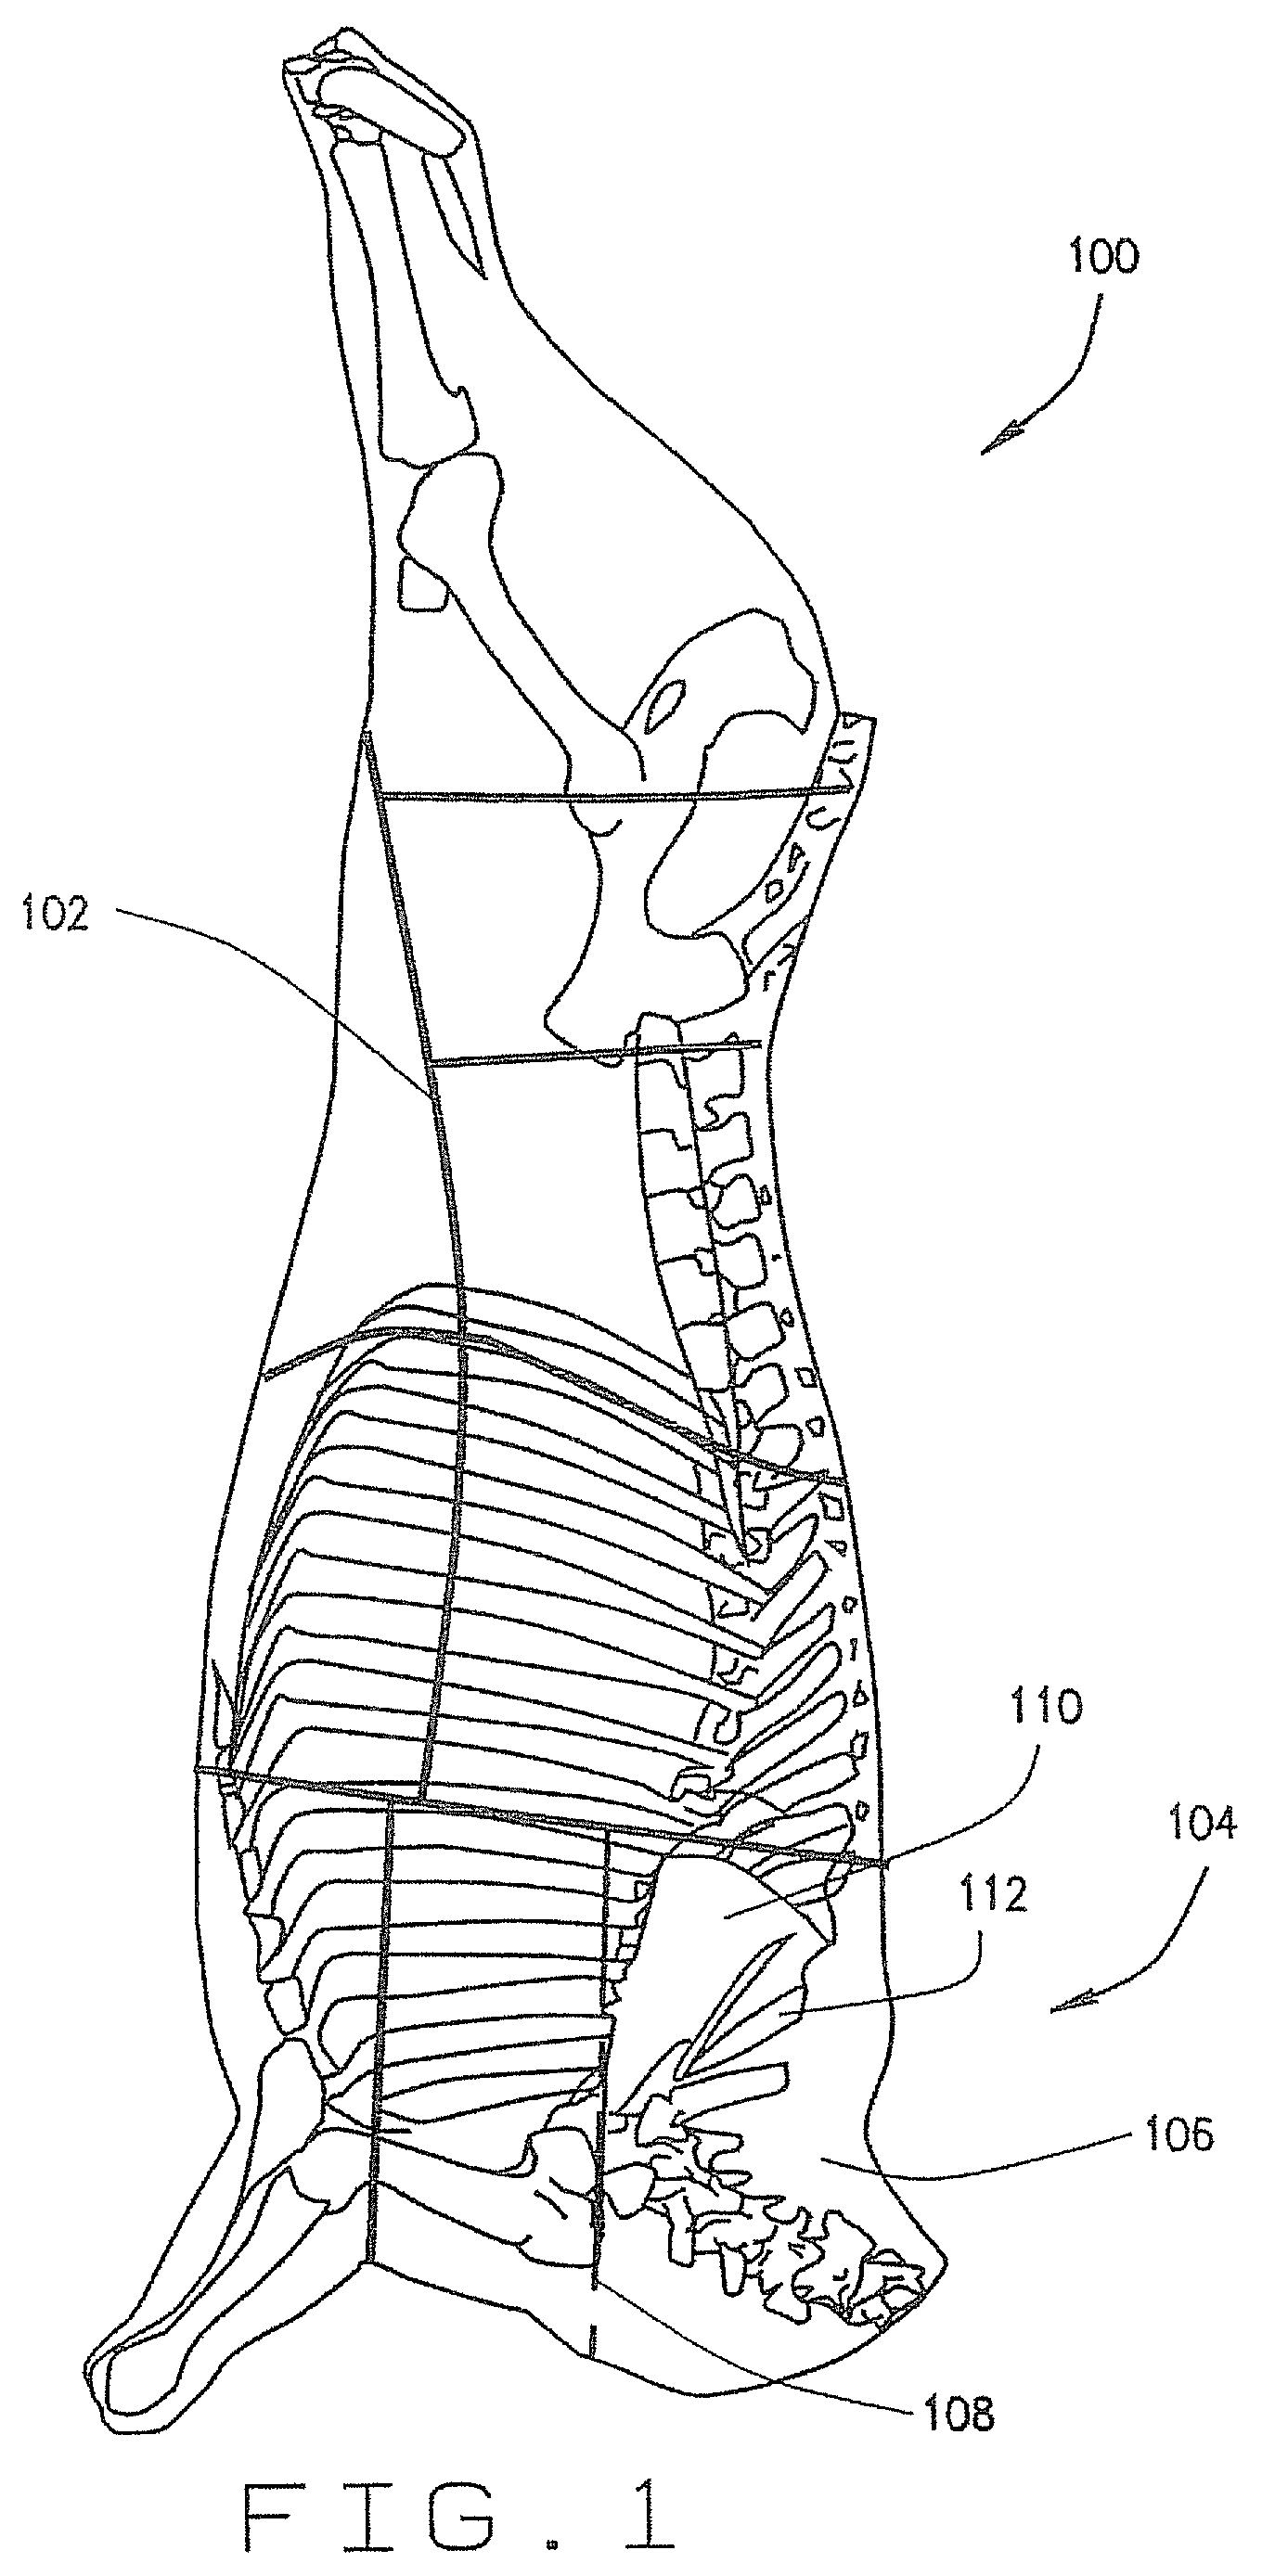 Method and apparatus to load and remove bones from primals